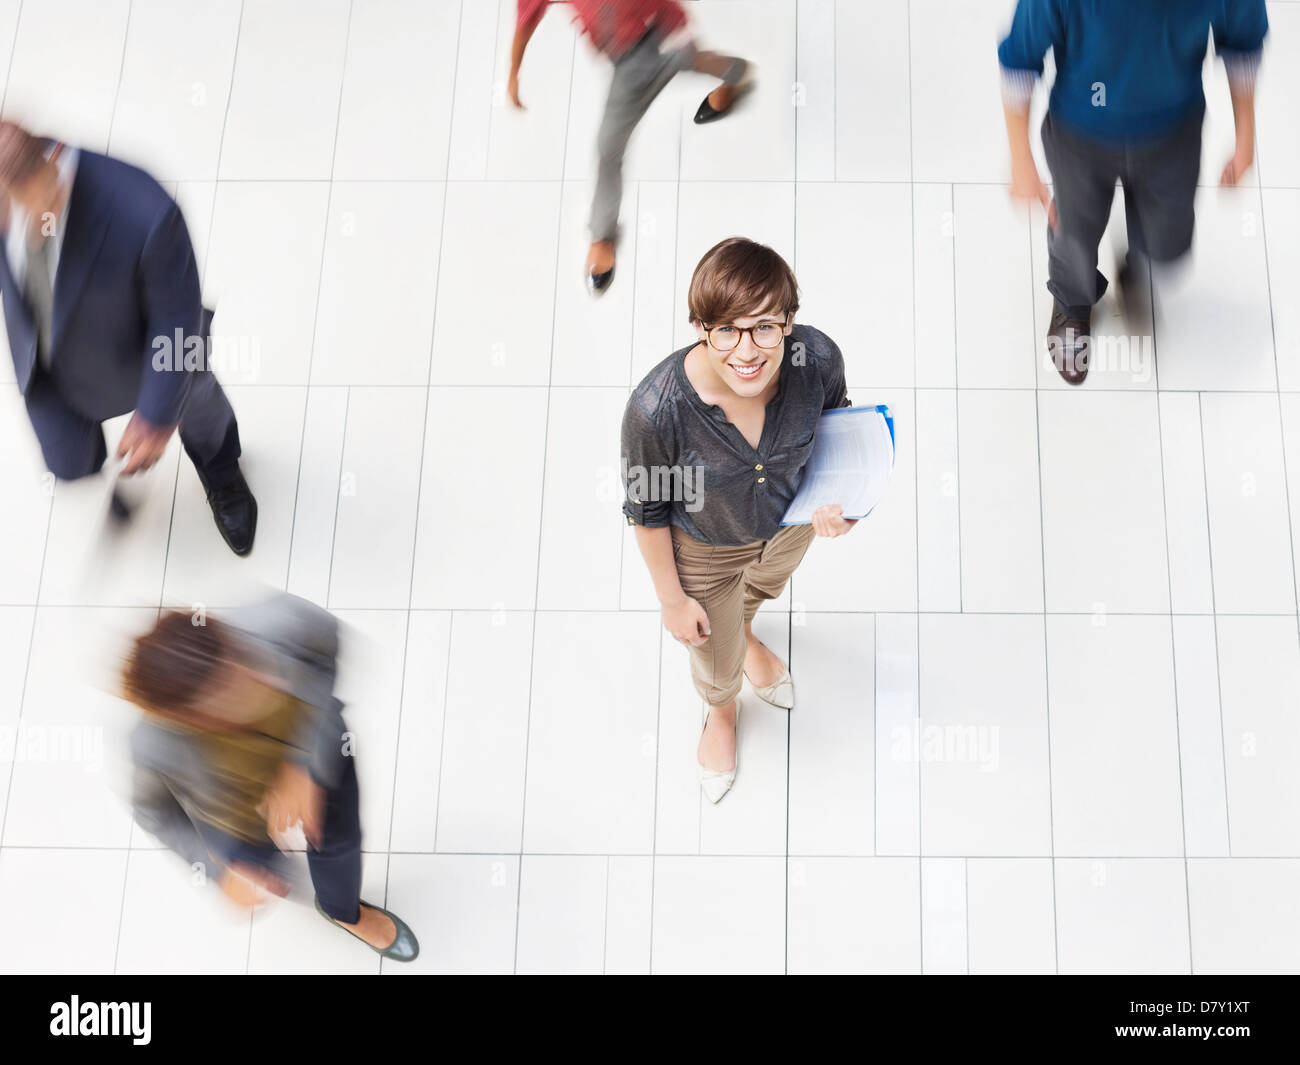 Businesswoman smiling in busy office hallway Banque D'Images